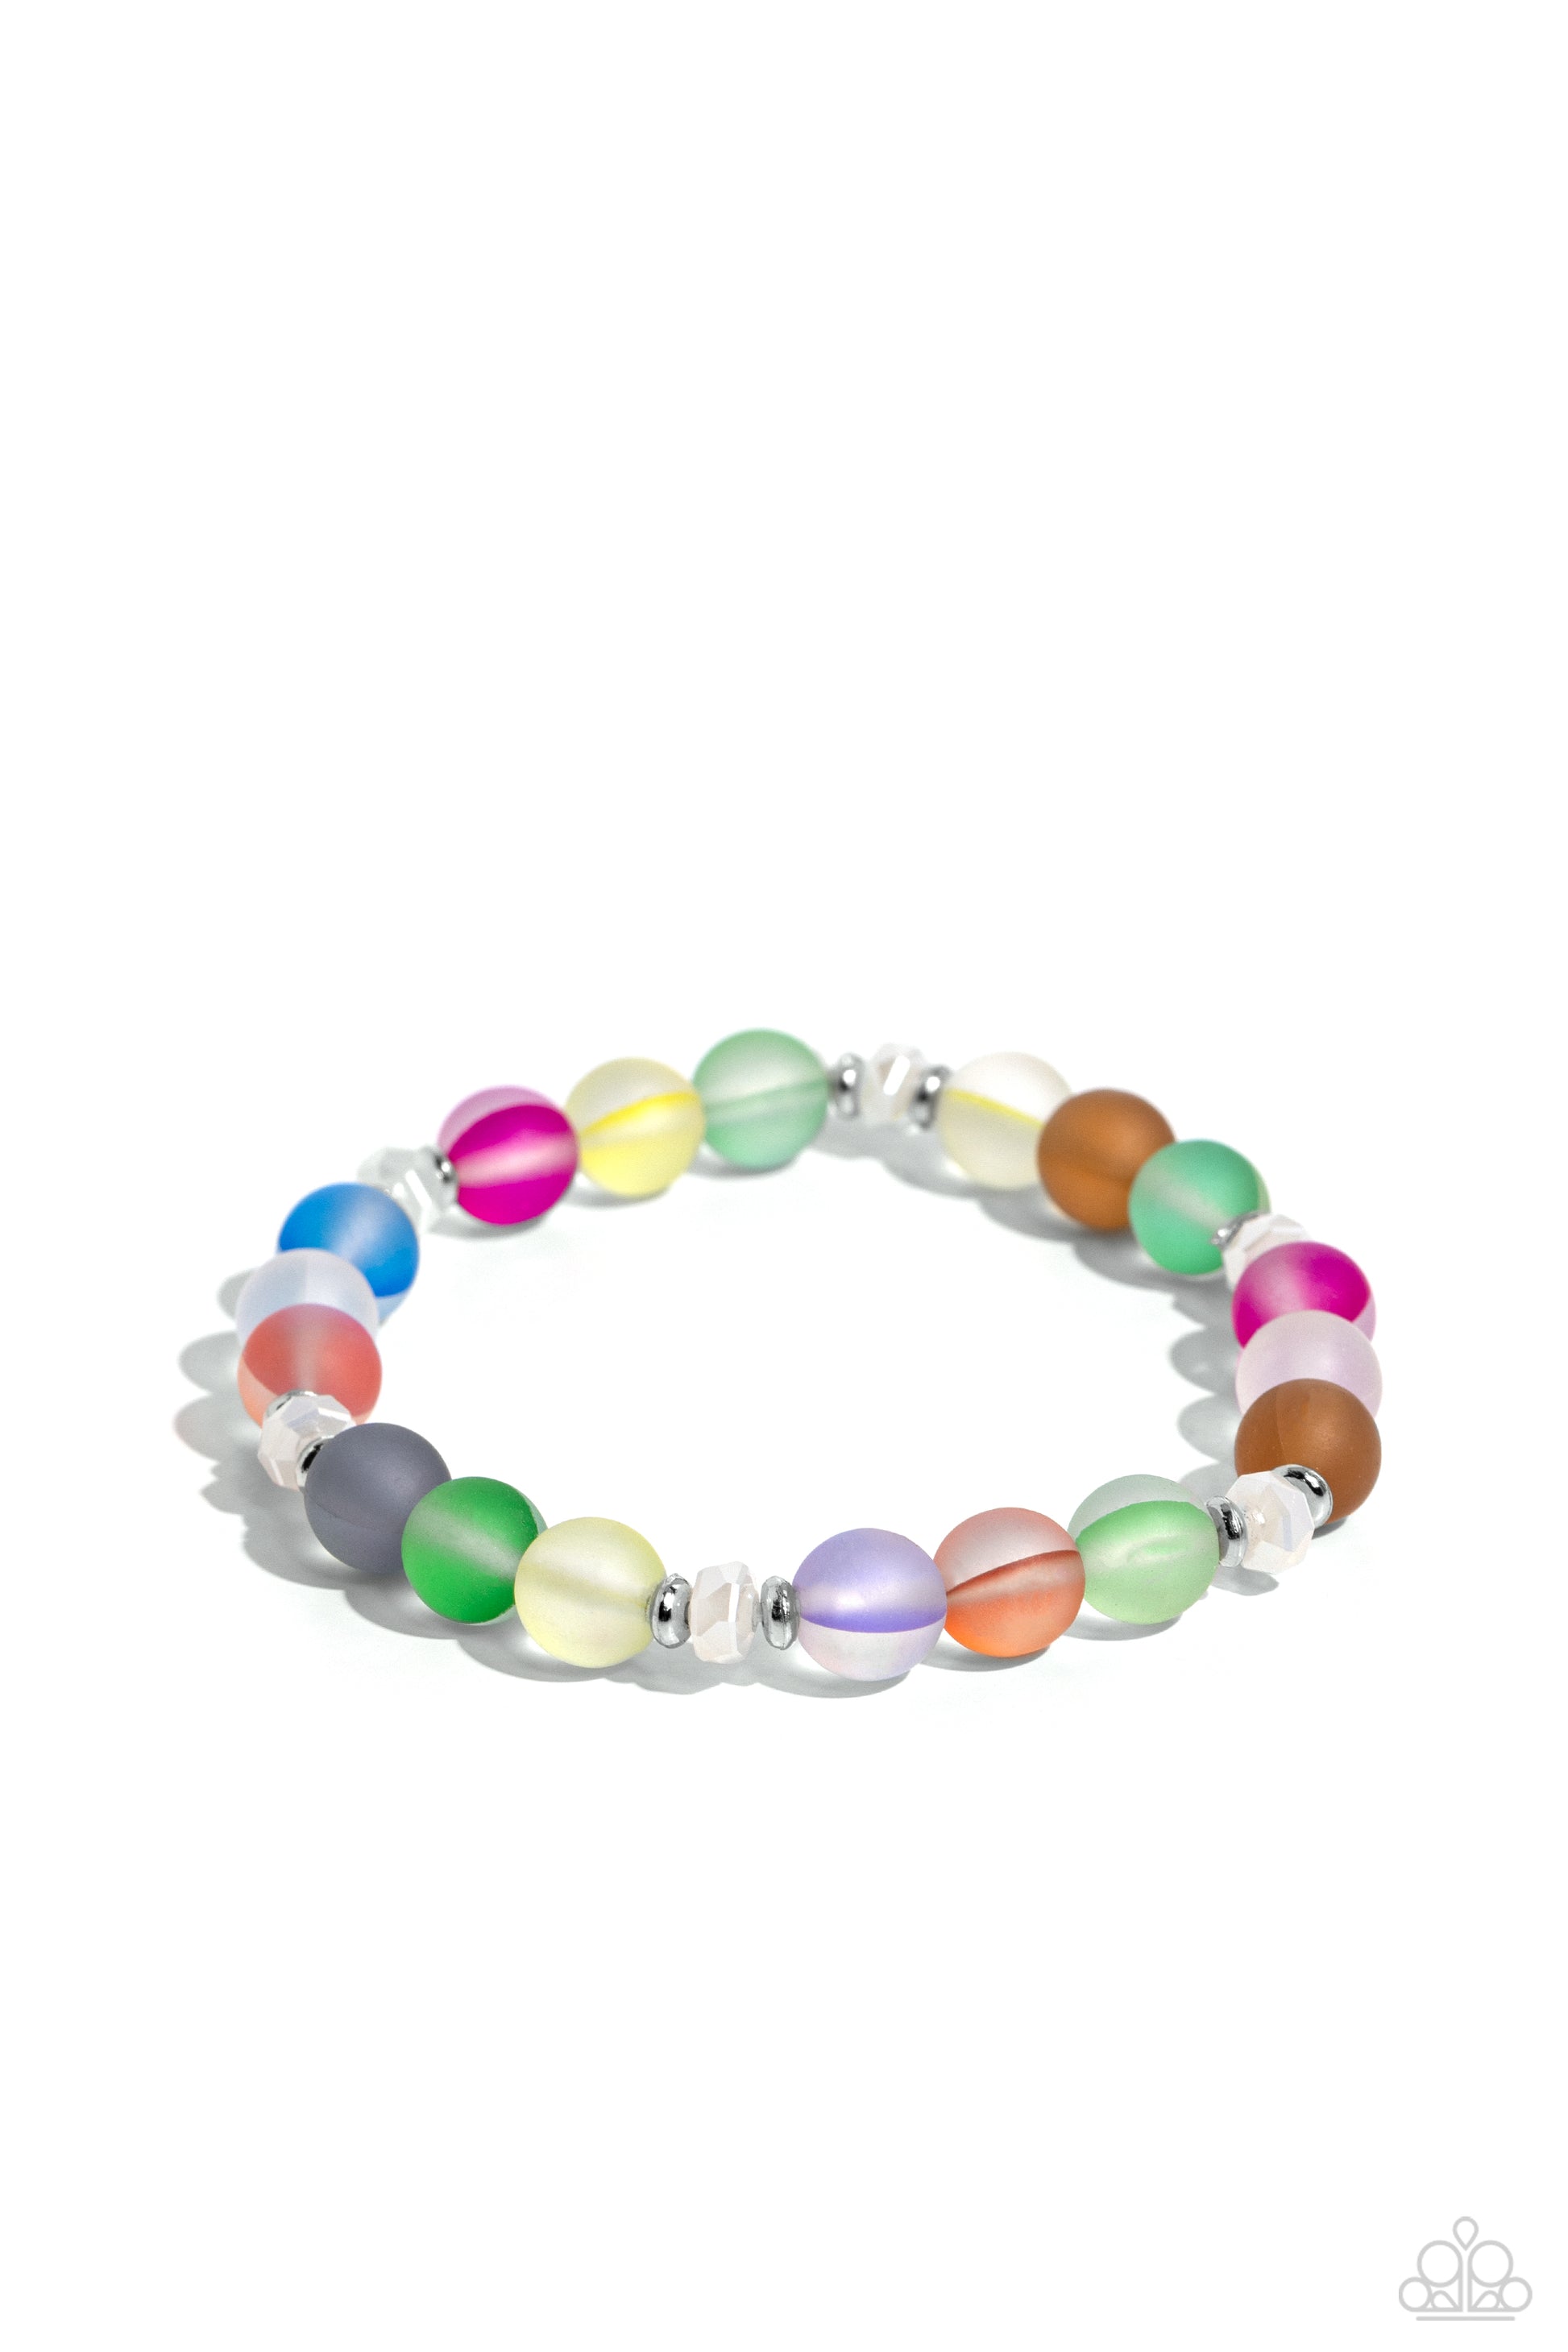 Infused with silver accents and faceted white beads, a dreamy collection of frosted glassy multicolored beads is threaded along a stretchy band around the wrist for an enchanting glow.  Sold as one individual bracelet.